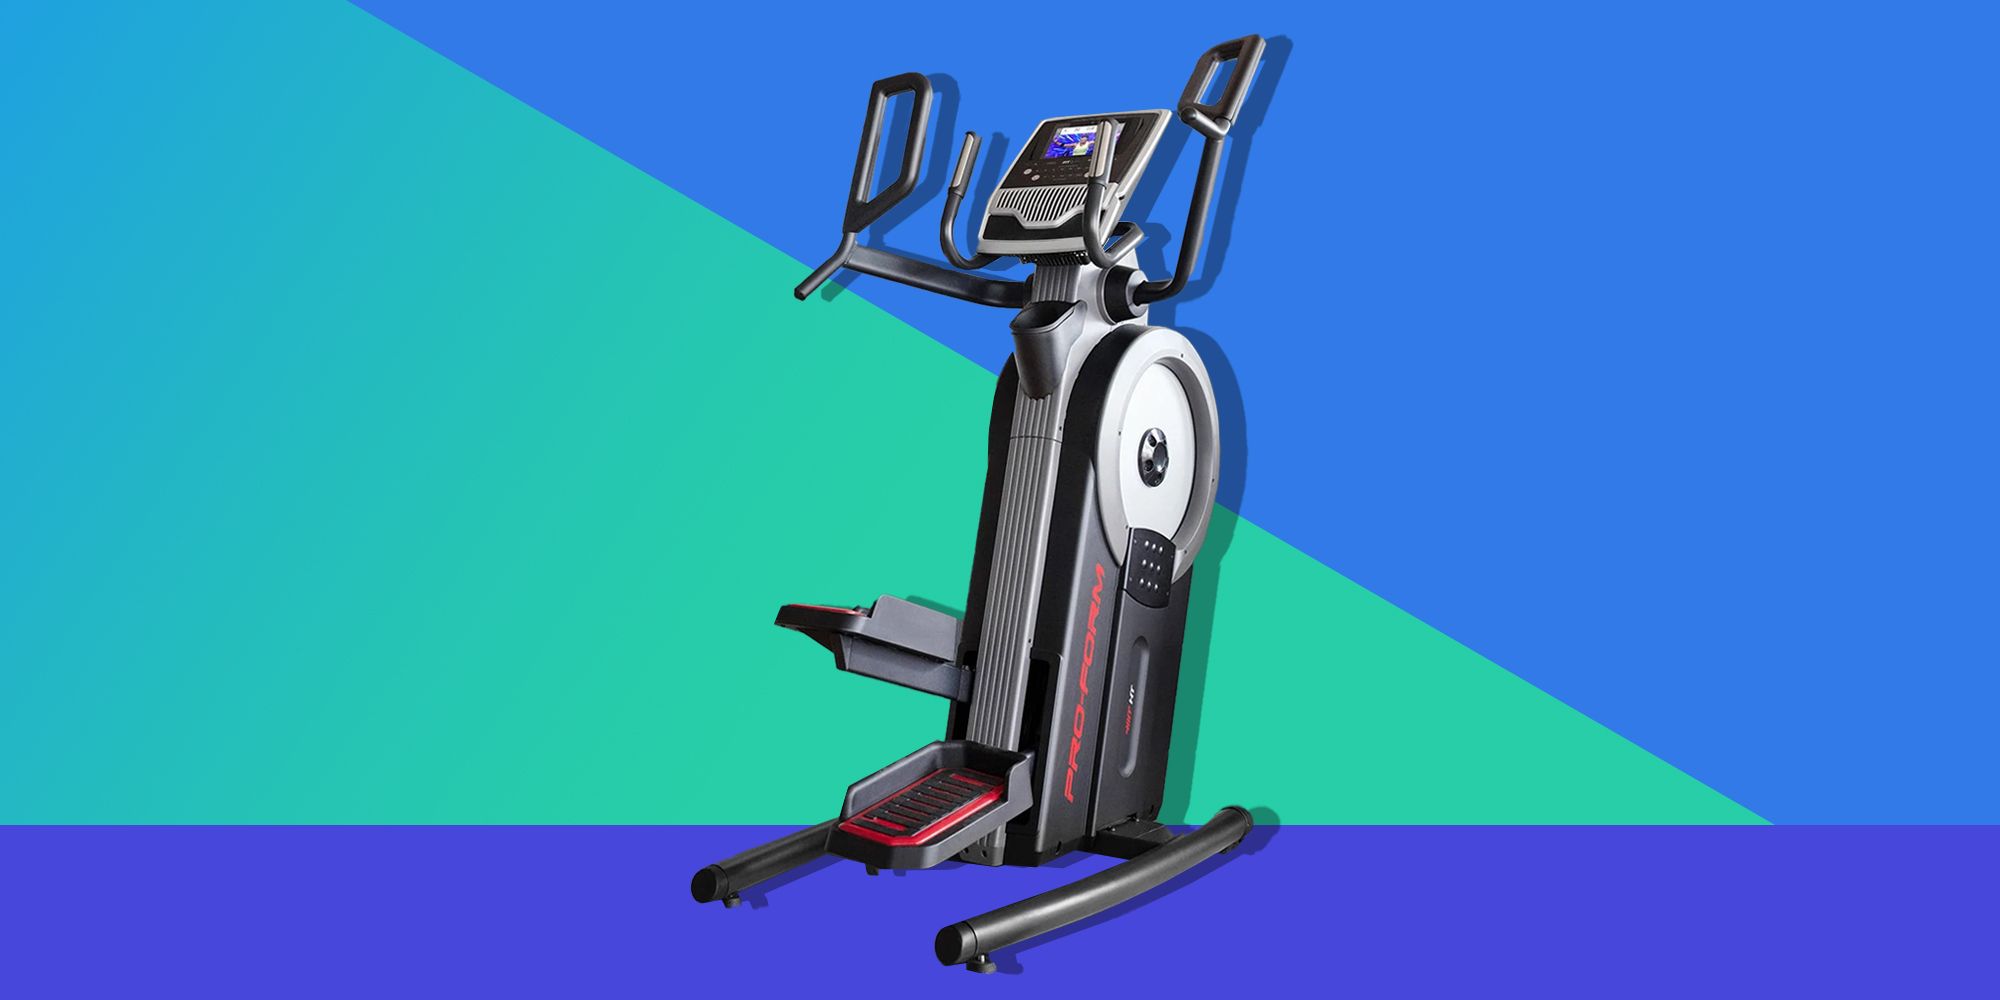 Details about   Stair Stepper Exercise Machine Fitness Cardio Workout Aerobic Handle Bar Climber 